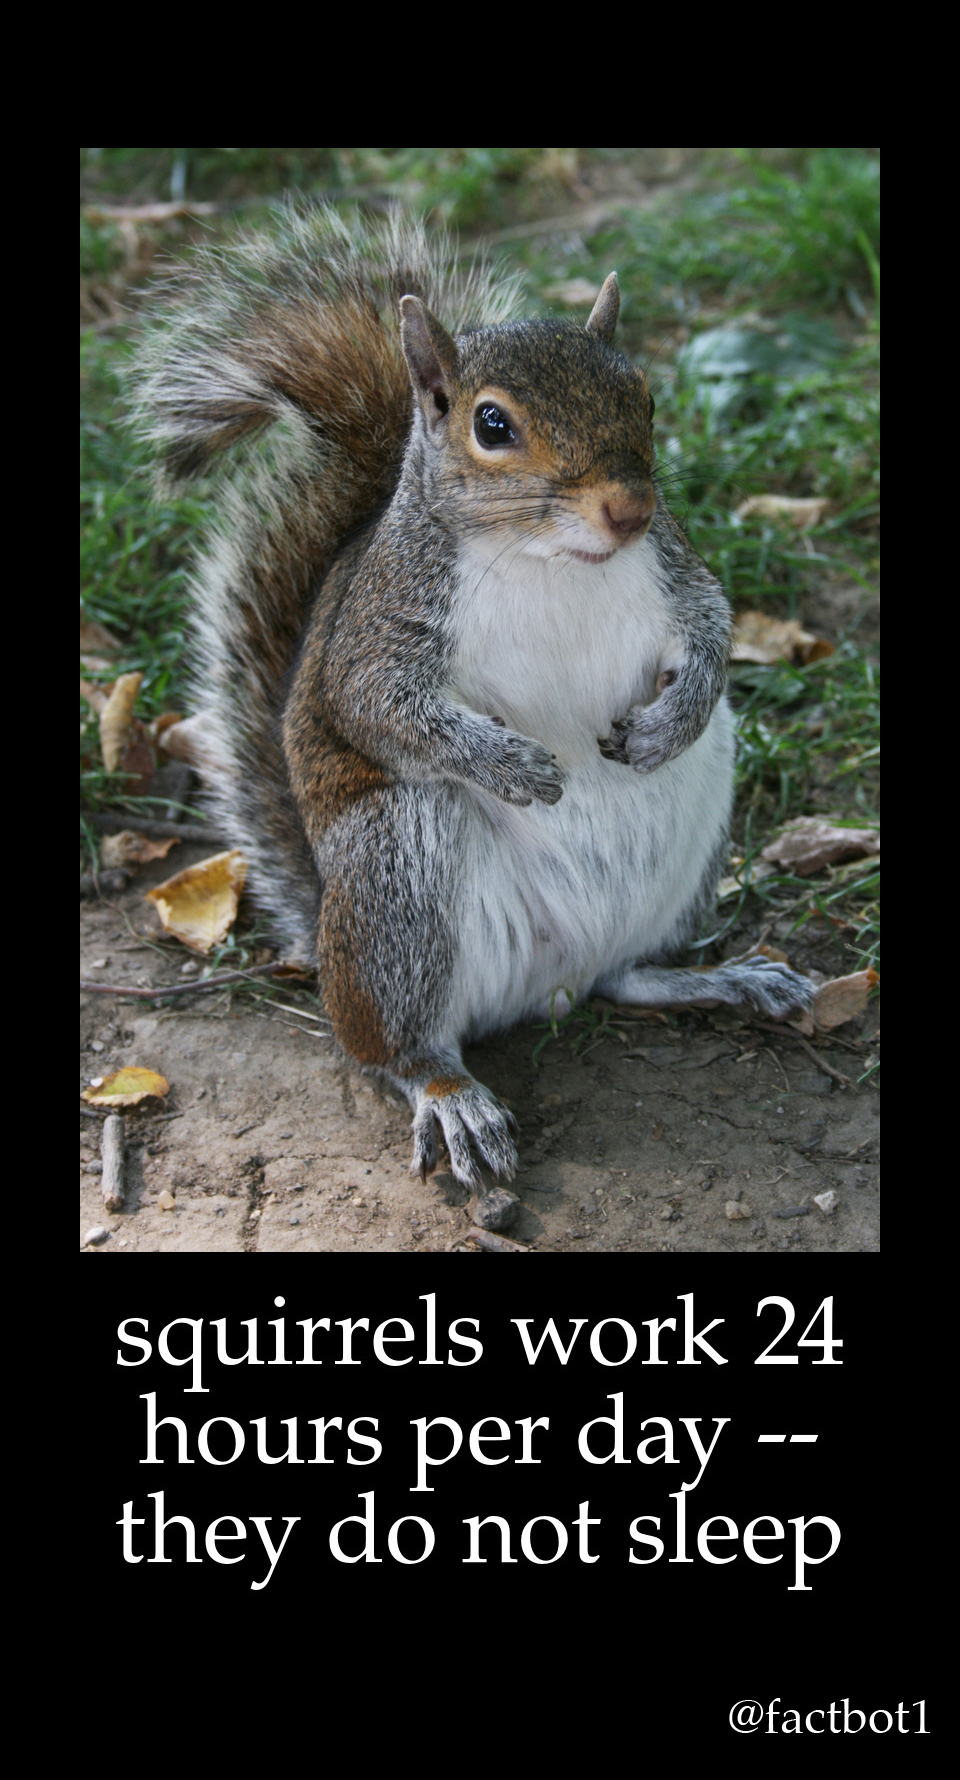 squirrel usa - squirrels work 24 hours per day they do not sleep